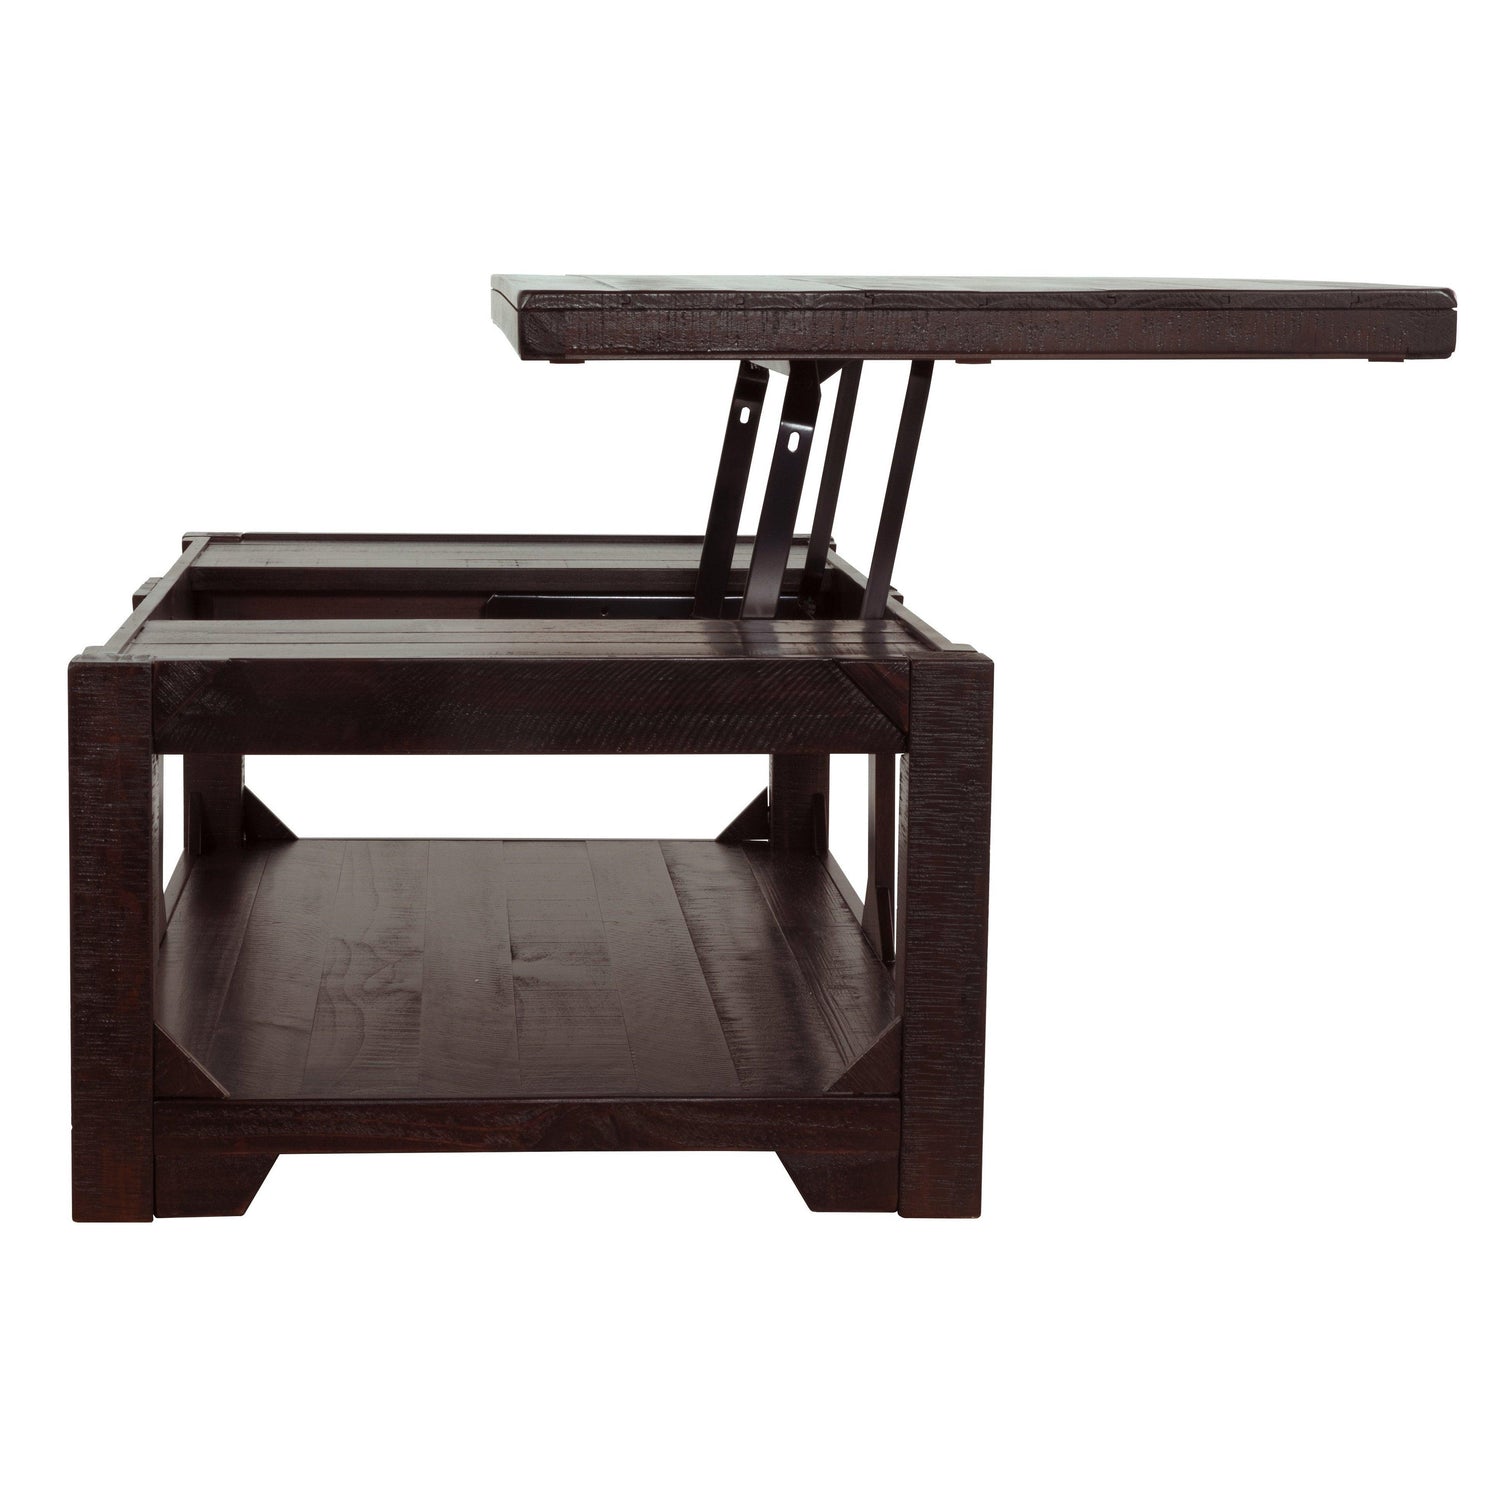 Rogness Coffee Table with Lift Top Ash-T745-9